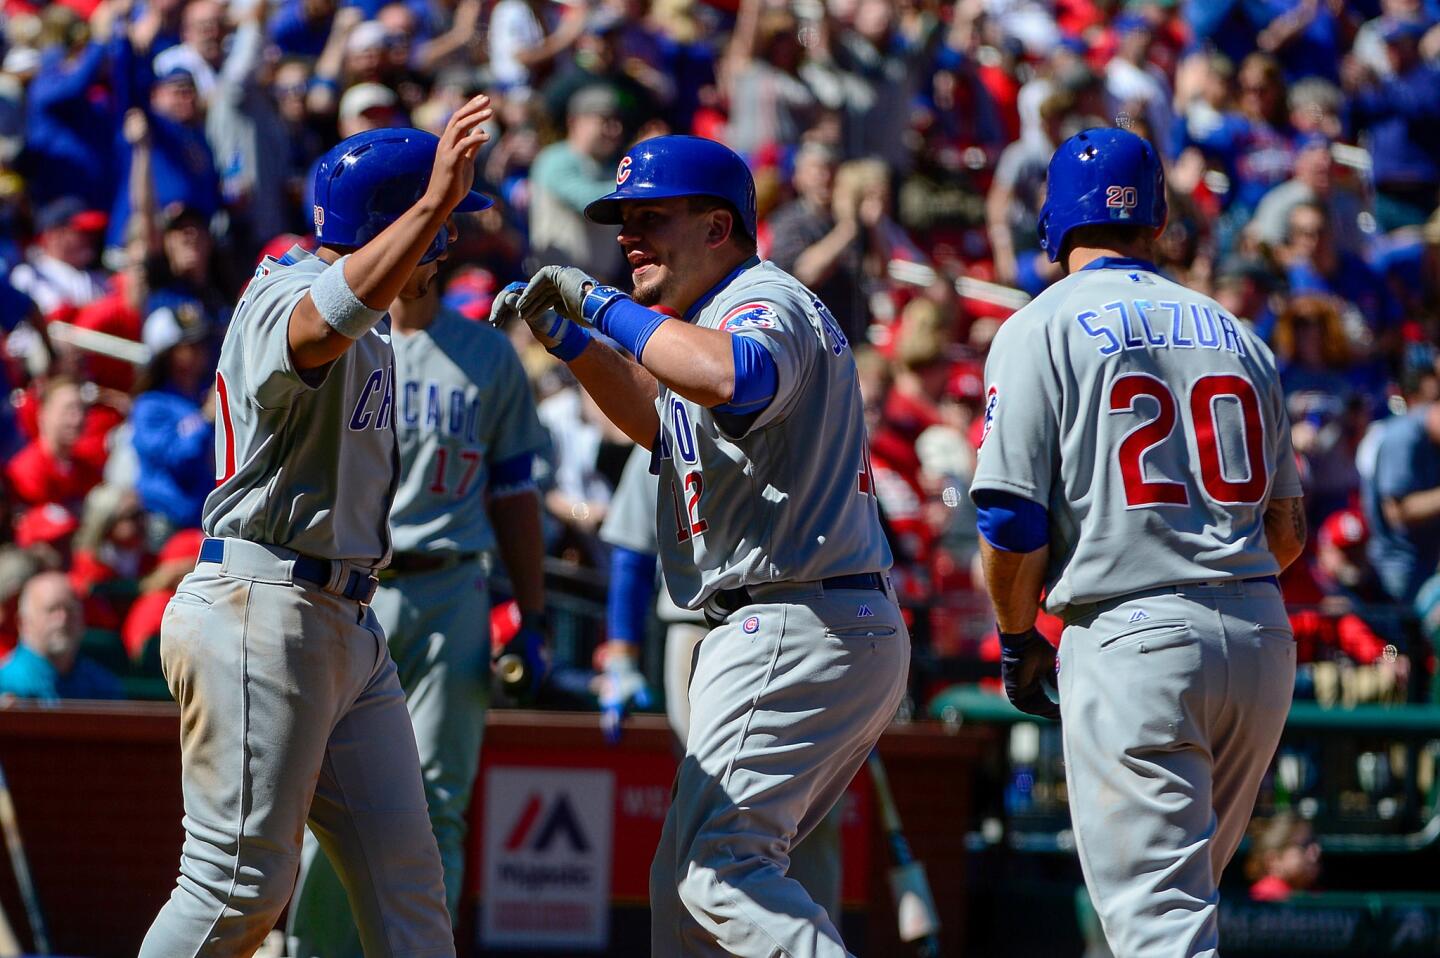 A third strike that stuck on the chest protector of Yadier Molina set up a seventh-inning rally Kyle Schwarber capped with a three-run homer off left-hander Brett Cecil. Cubs beat Cardinals 6-4 in St. Louis.